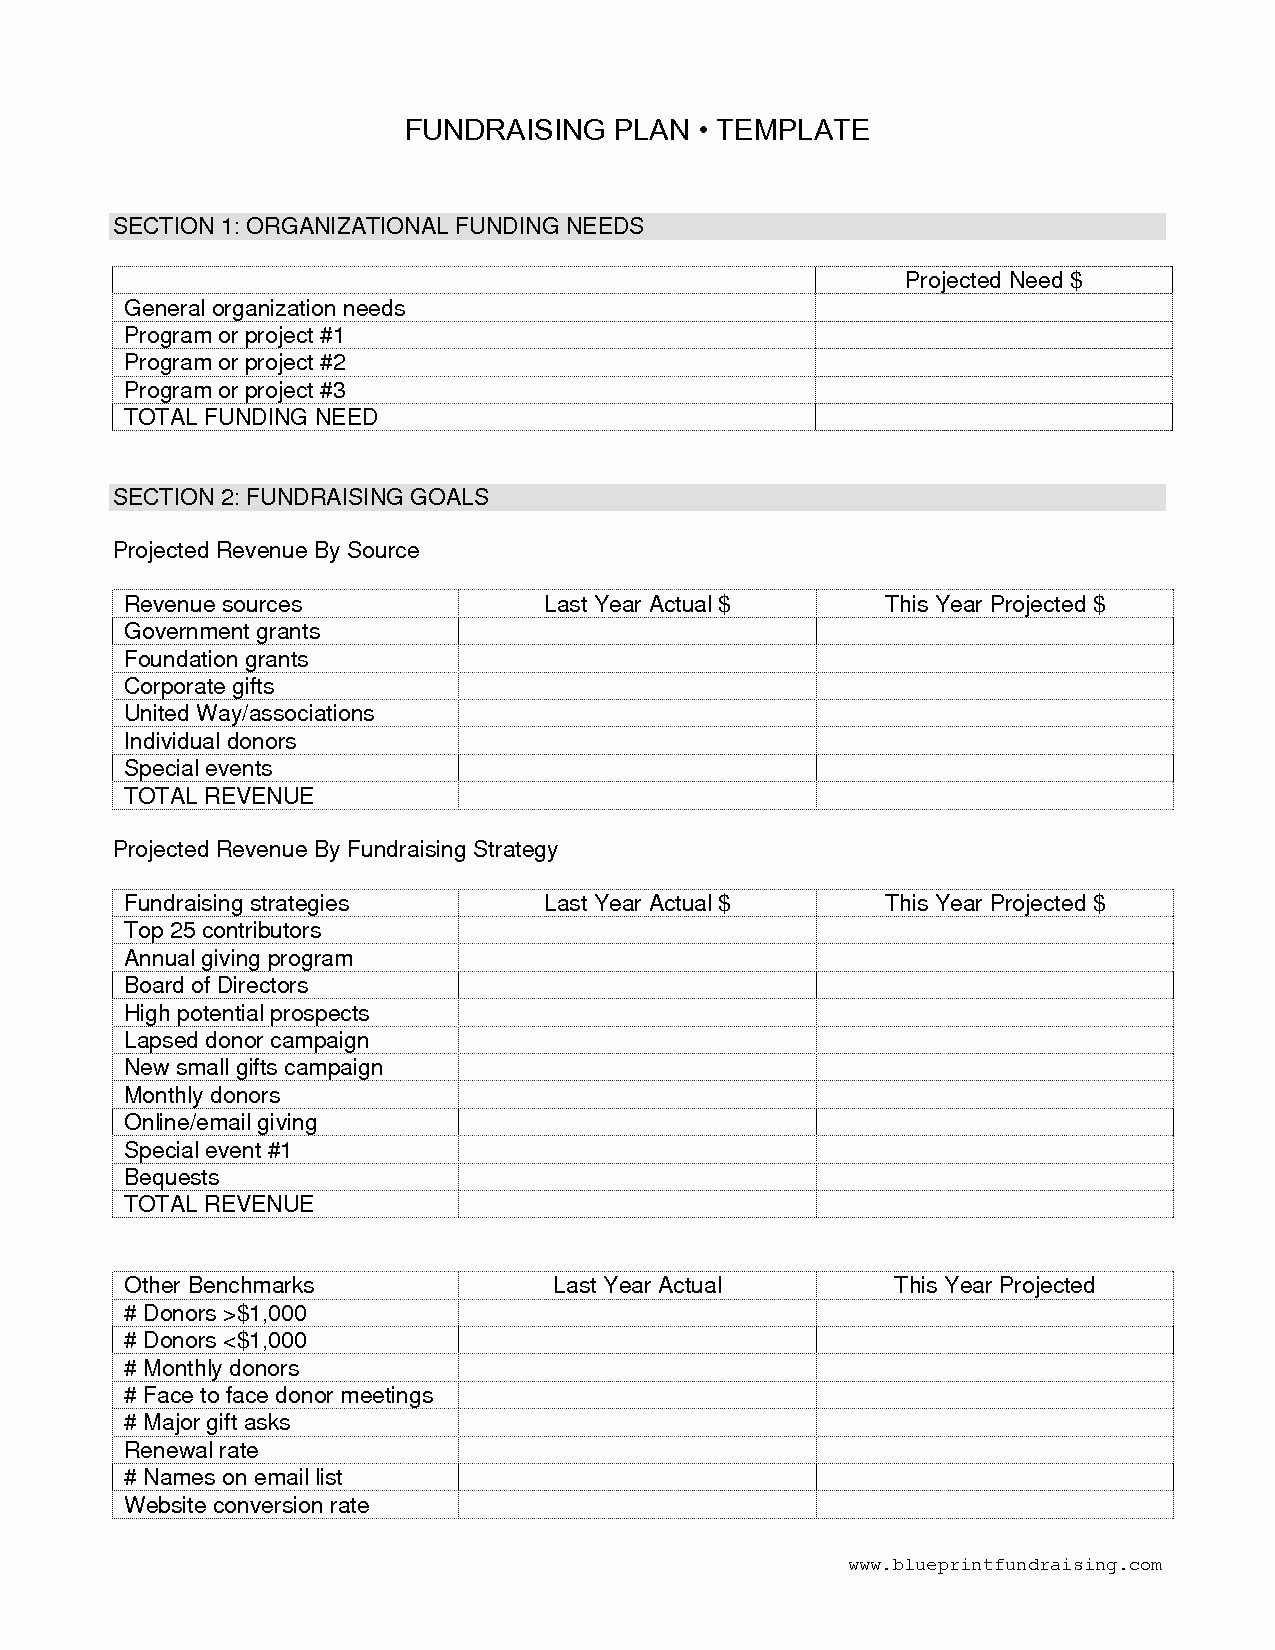 Fundraising Campaign Plan Template Best Of 9 Nonprofit Fundraising Plan Examples Pdf